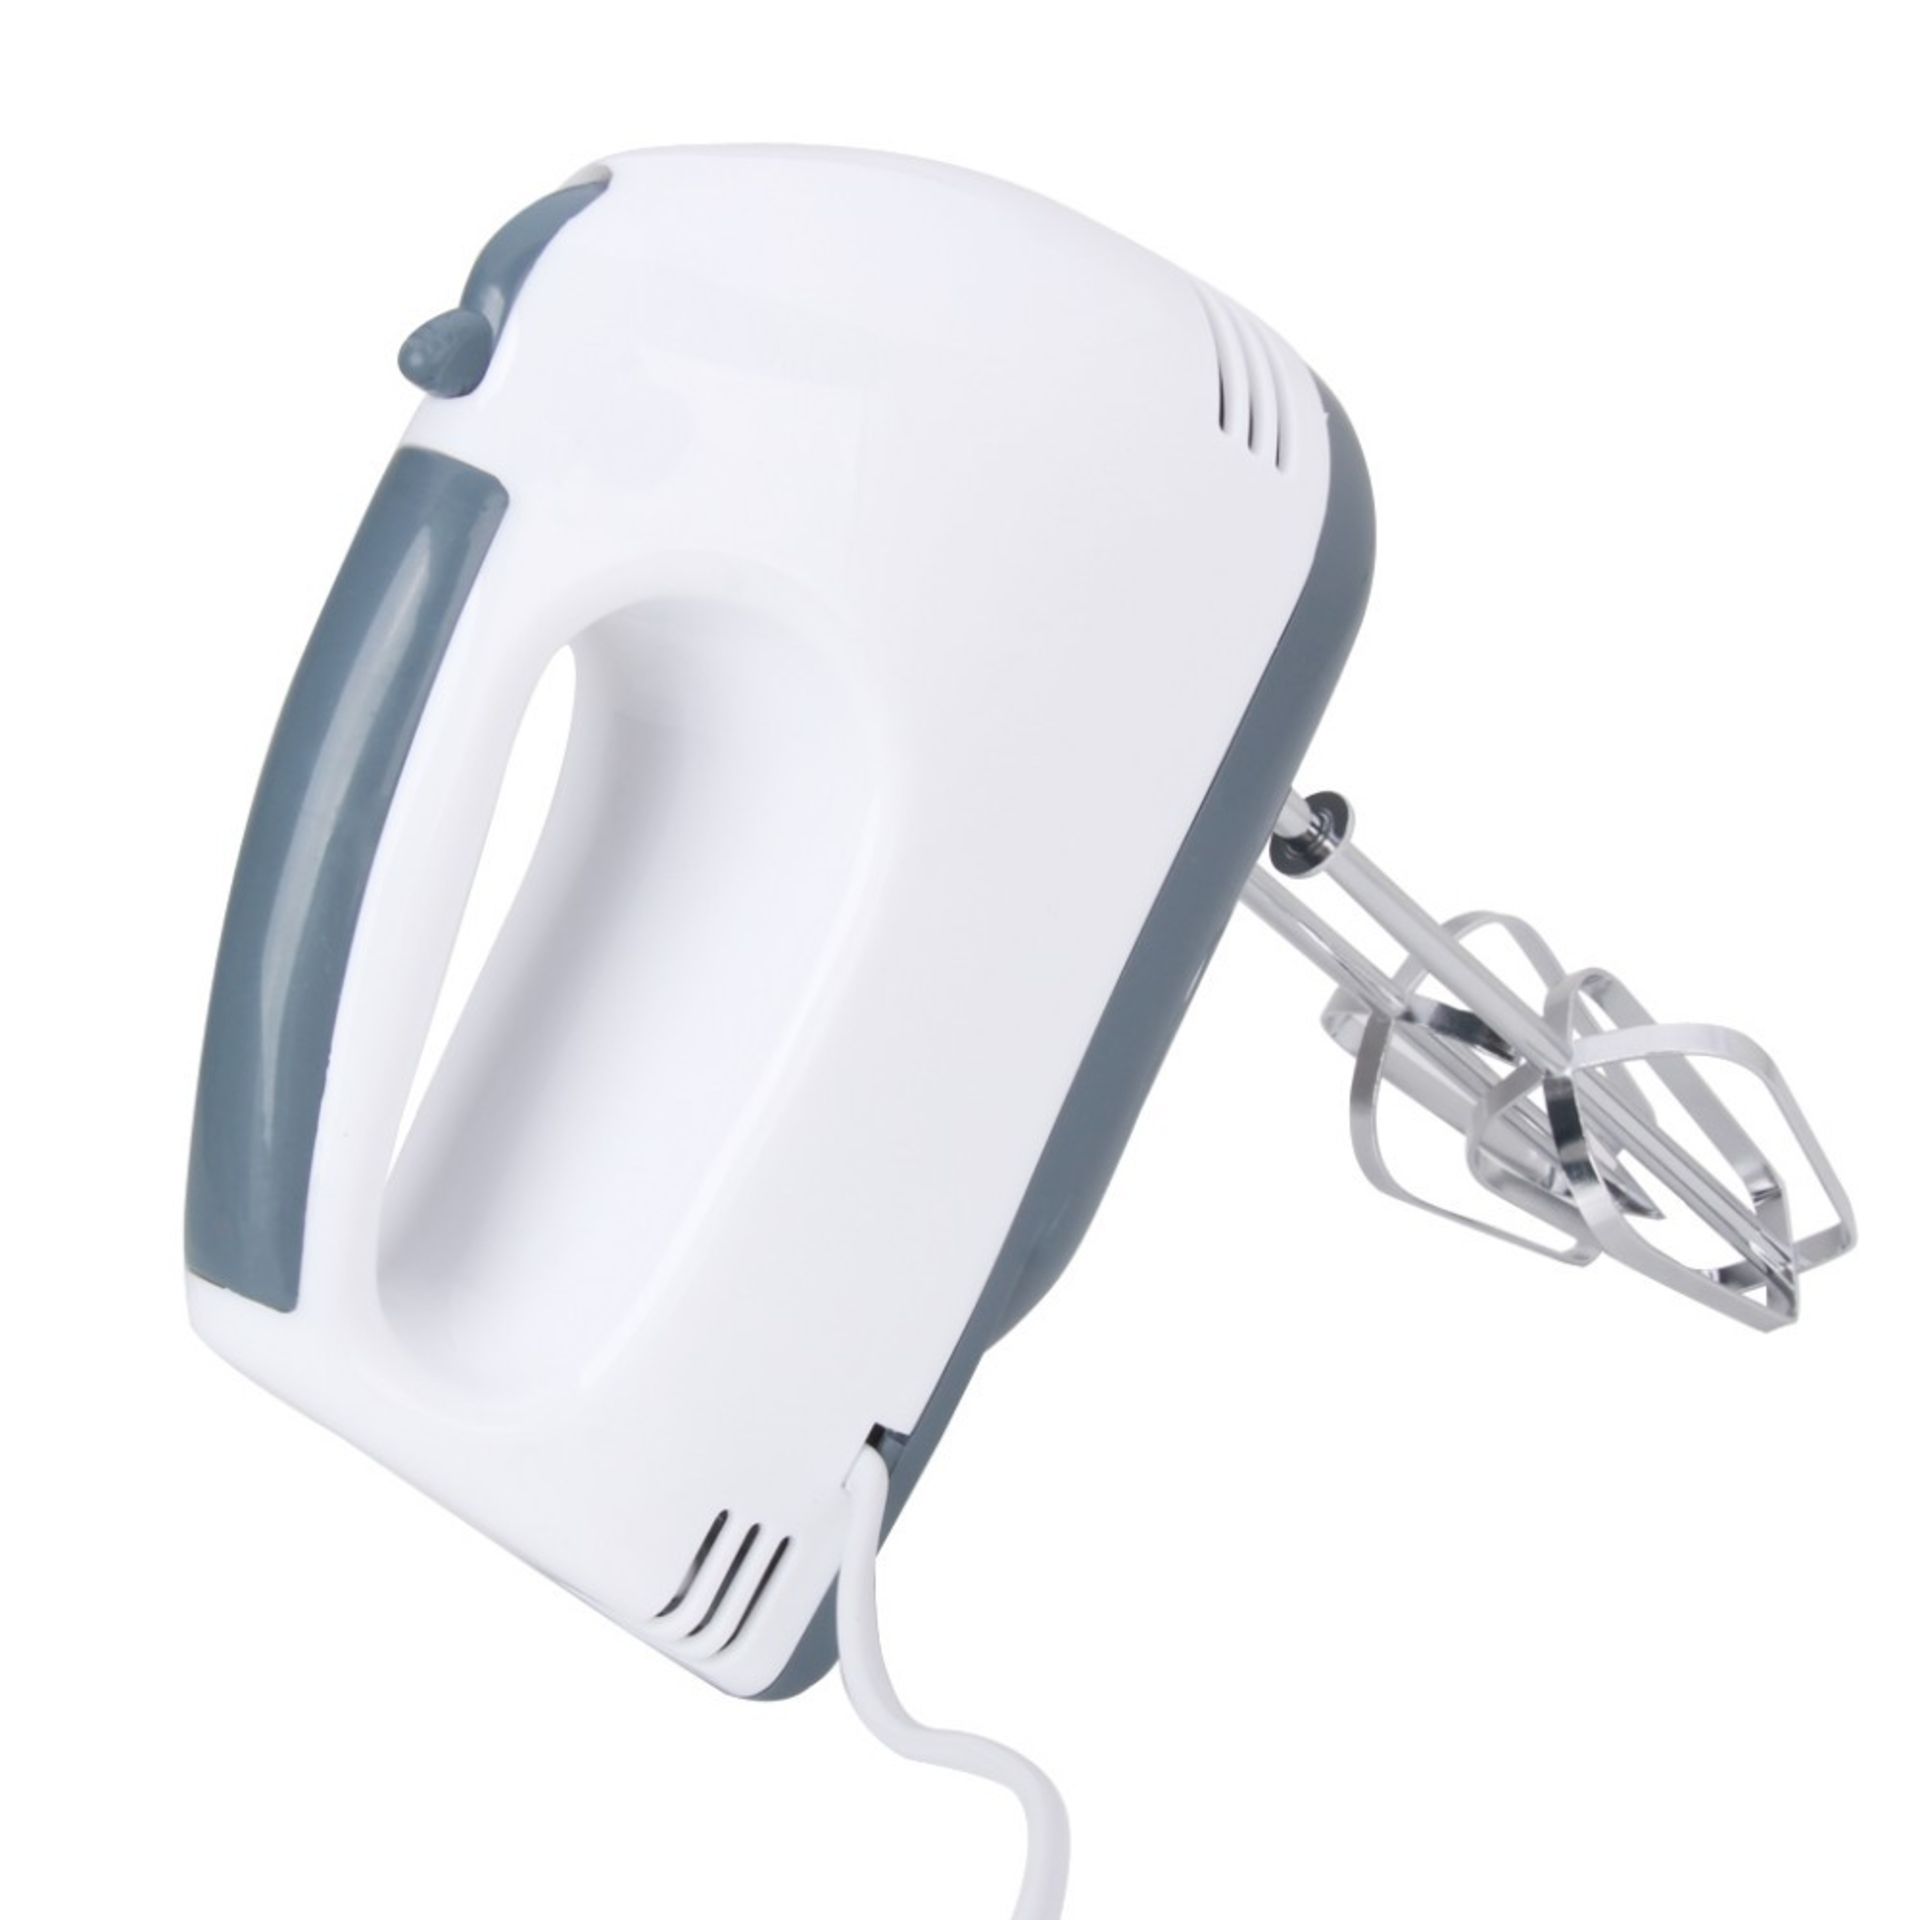 V *TRADE QTY* Brand New Delta Kitchen Hand Mixer 300w Powerful Extra Long Beaters & Dough Hooks-5